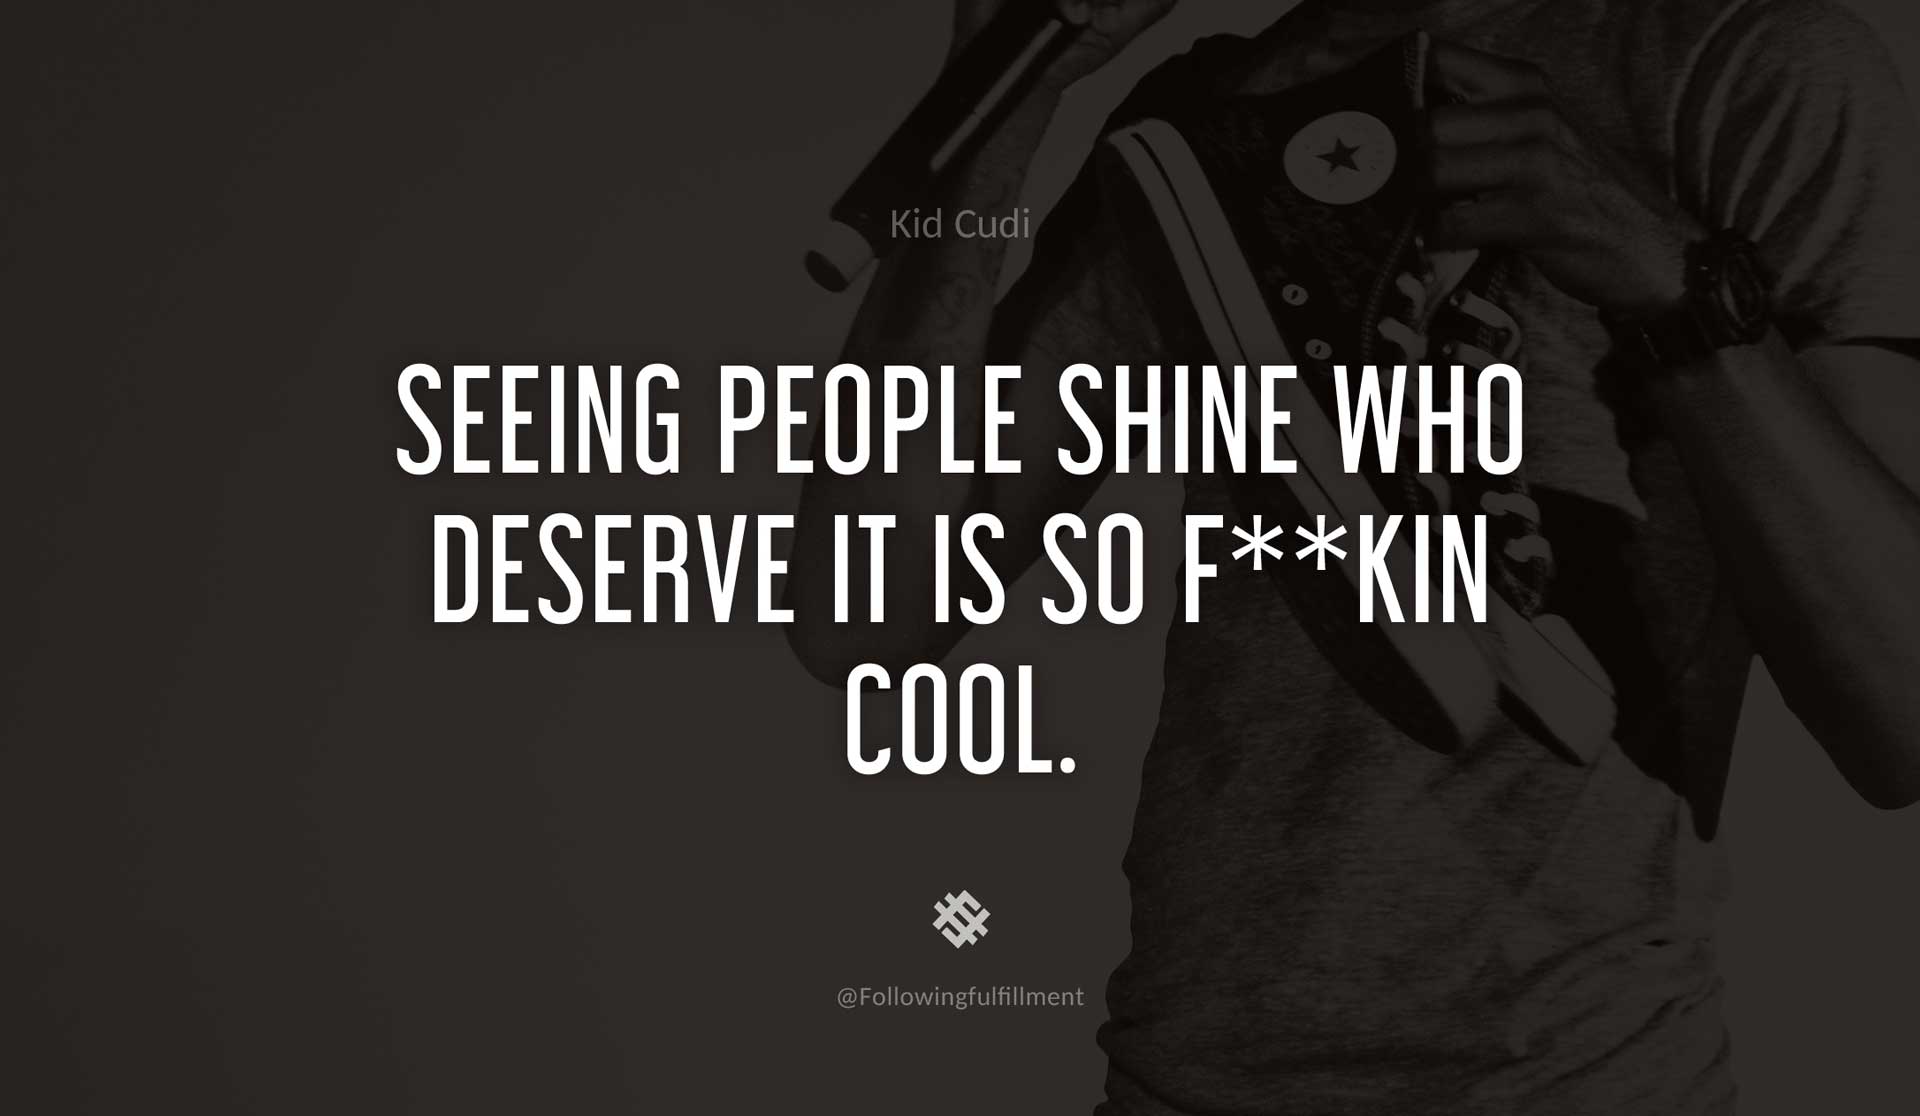 Seeing-people-shine-who-deserve-it-is-so-f--kin-cool.-KID-CUDI-Quote.jpg